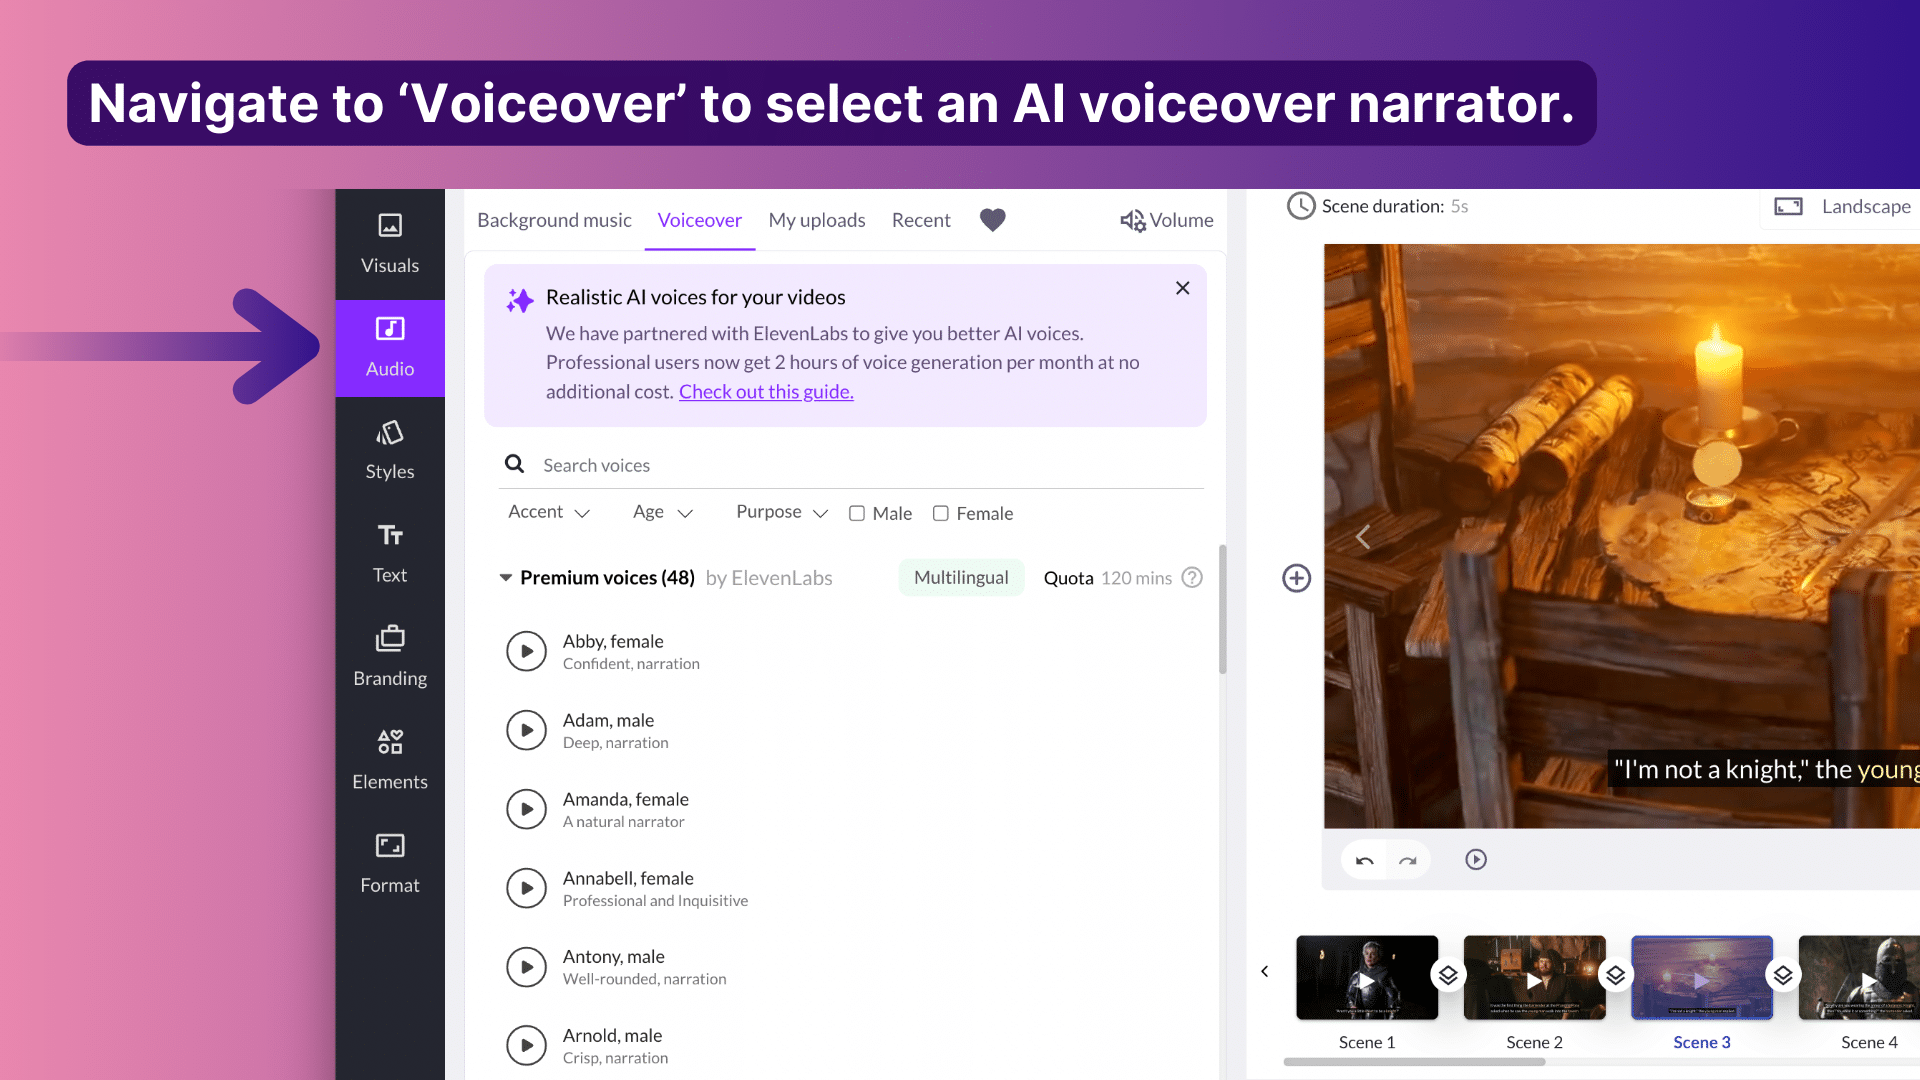 Pictory voiceovers, elevenlabs 